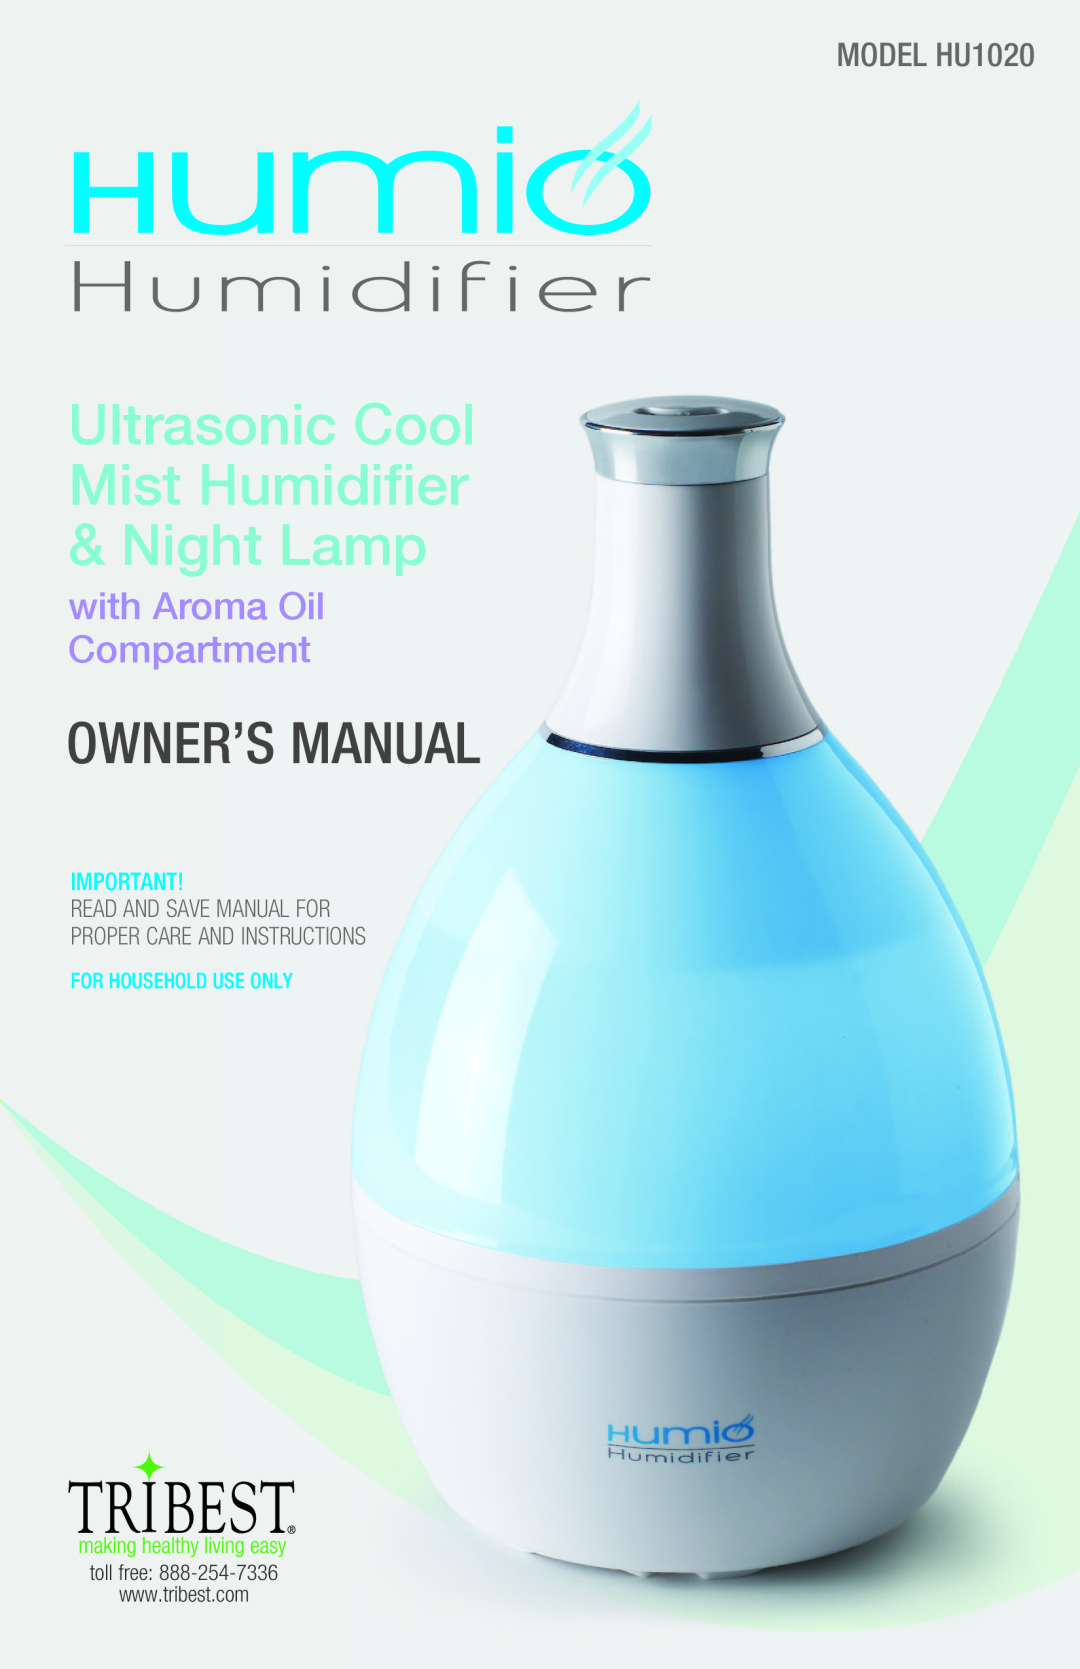 Tribest owner manual Ultrasonic Cool Mist Humidifier & Night Lamp, with Aroma Oil Compartment, MODEL HU1020 